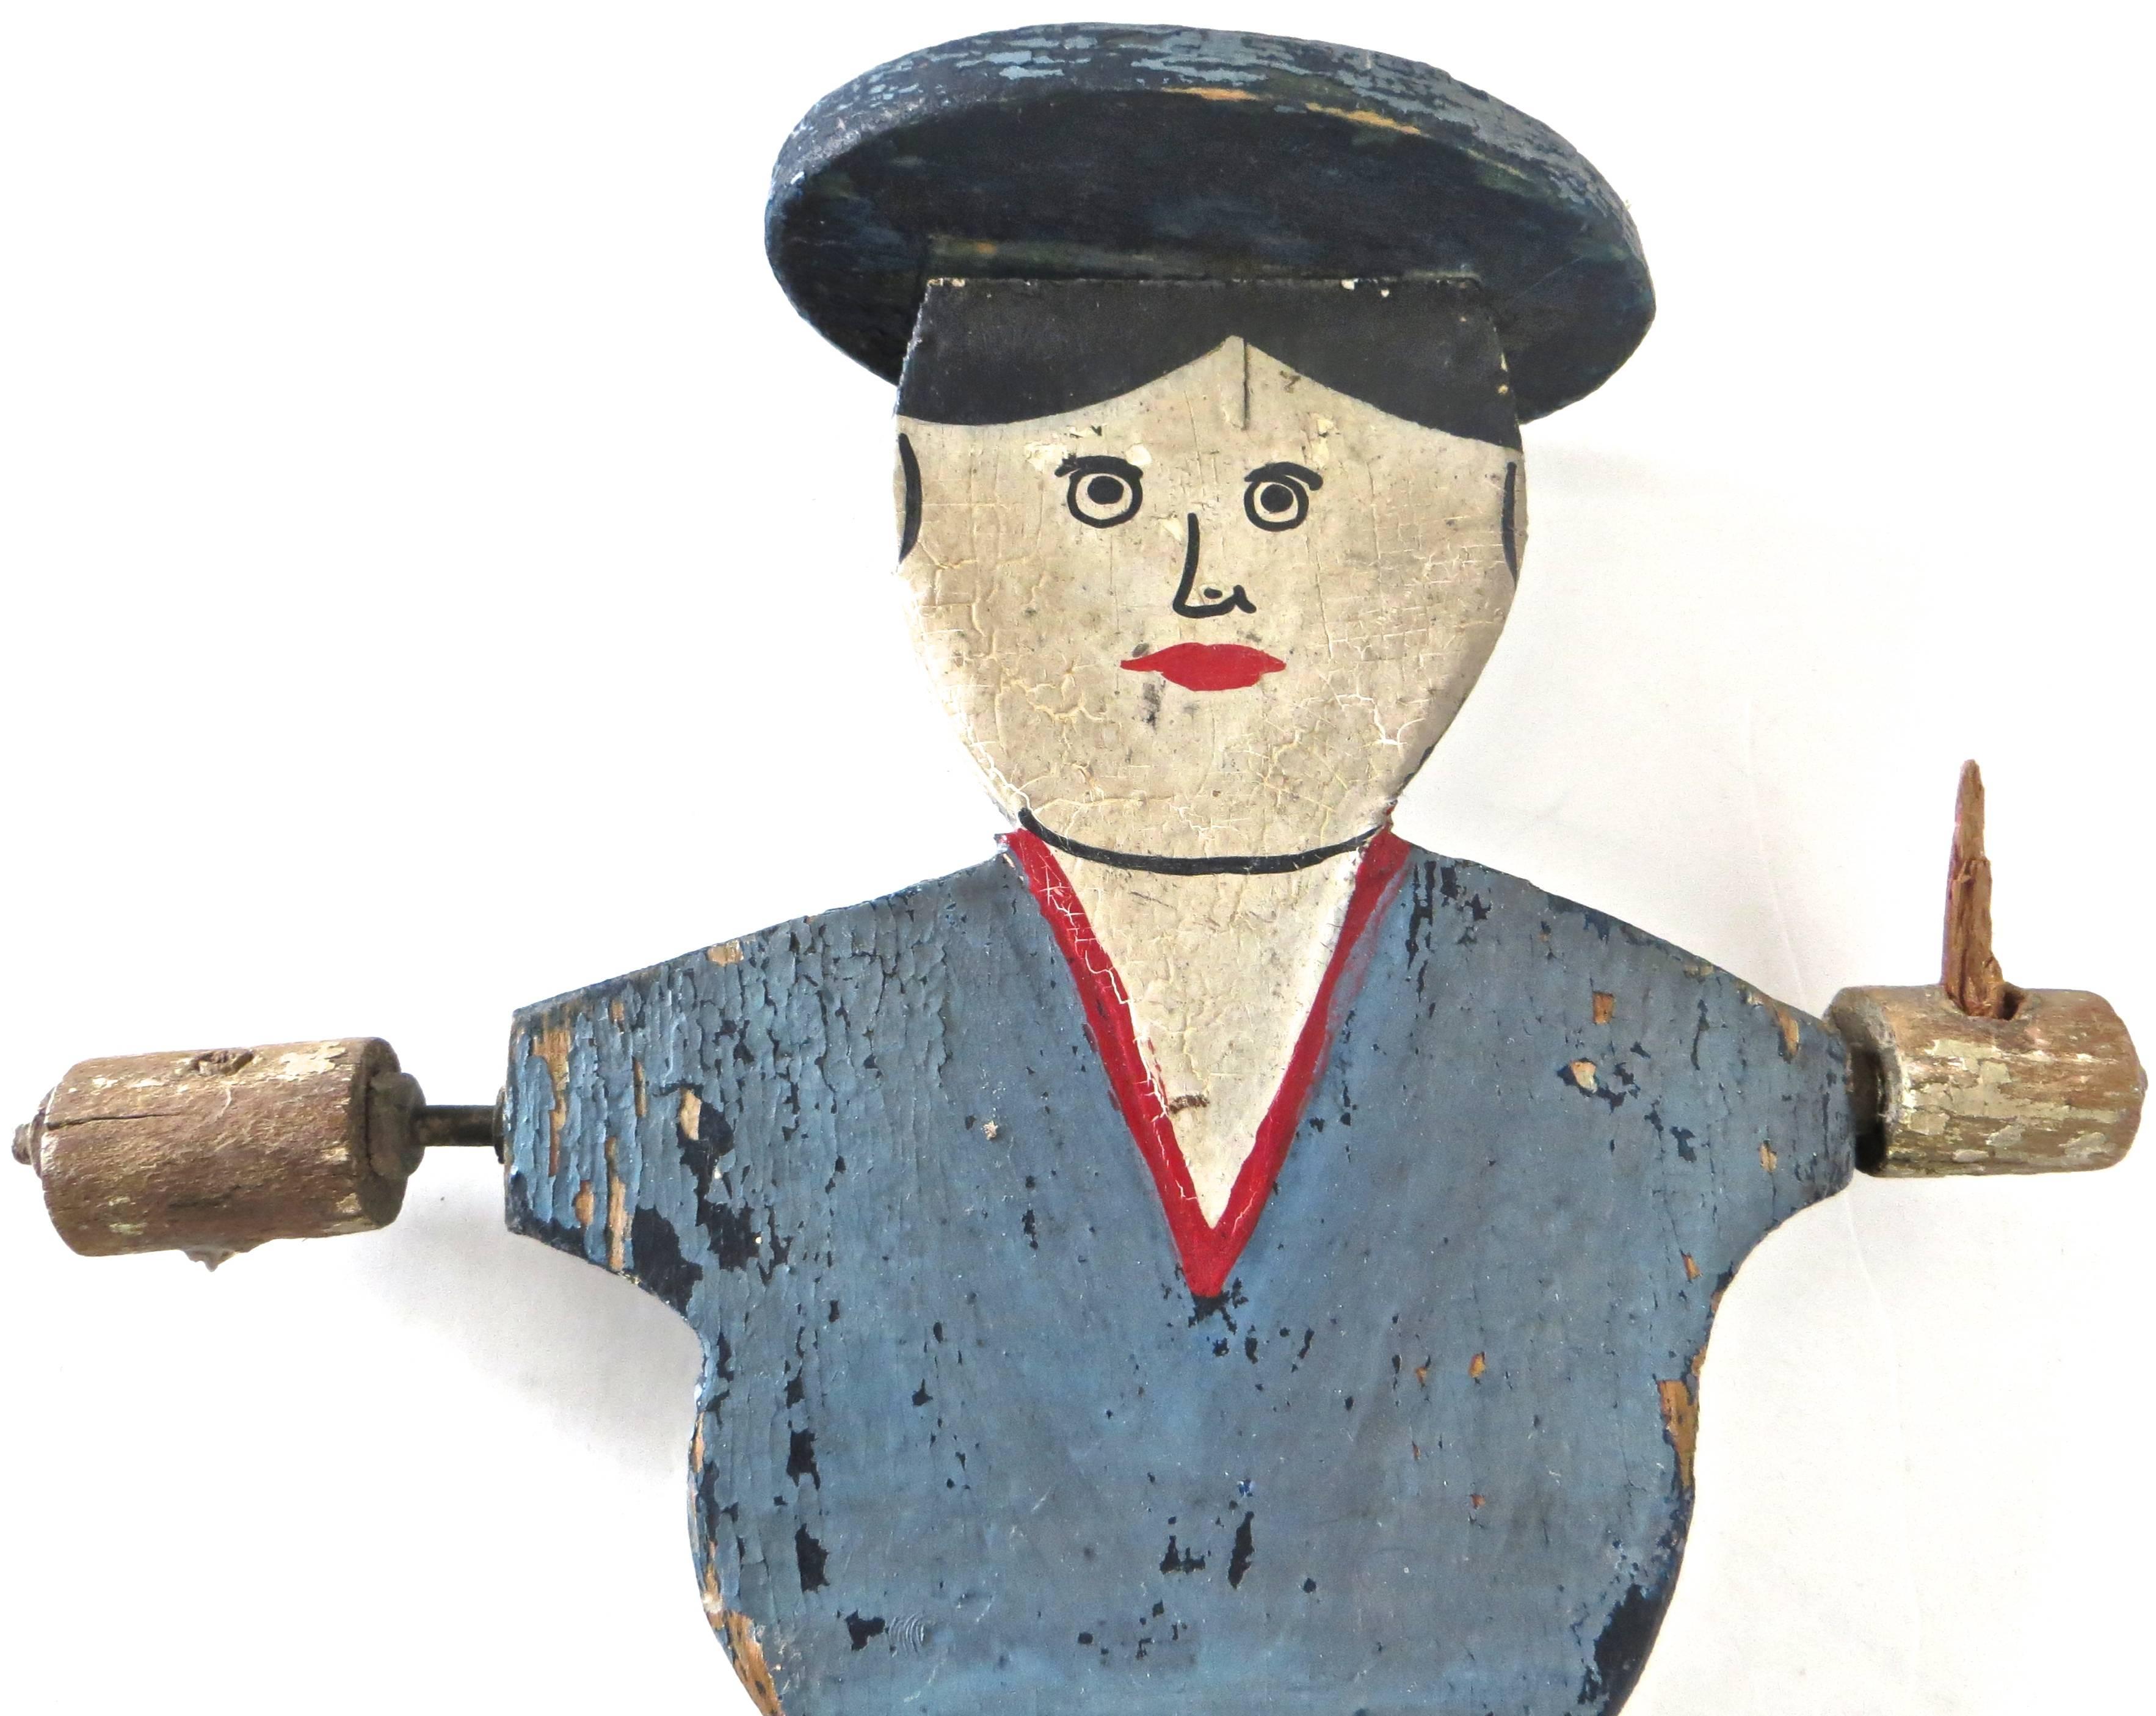 American 19th century Folk Art whirligig is hand-carved and painted, probably pine, in excellent original paint, which is obvious by noticeable period crazing. Sailor boy (lacking hand paddles which is usual) is painted in colors of red, white, and